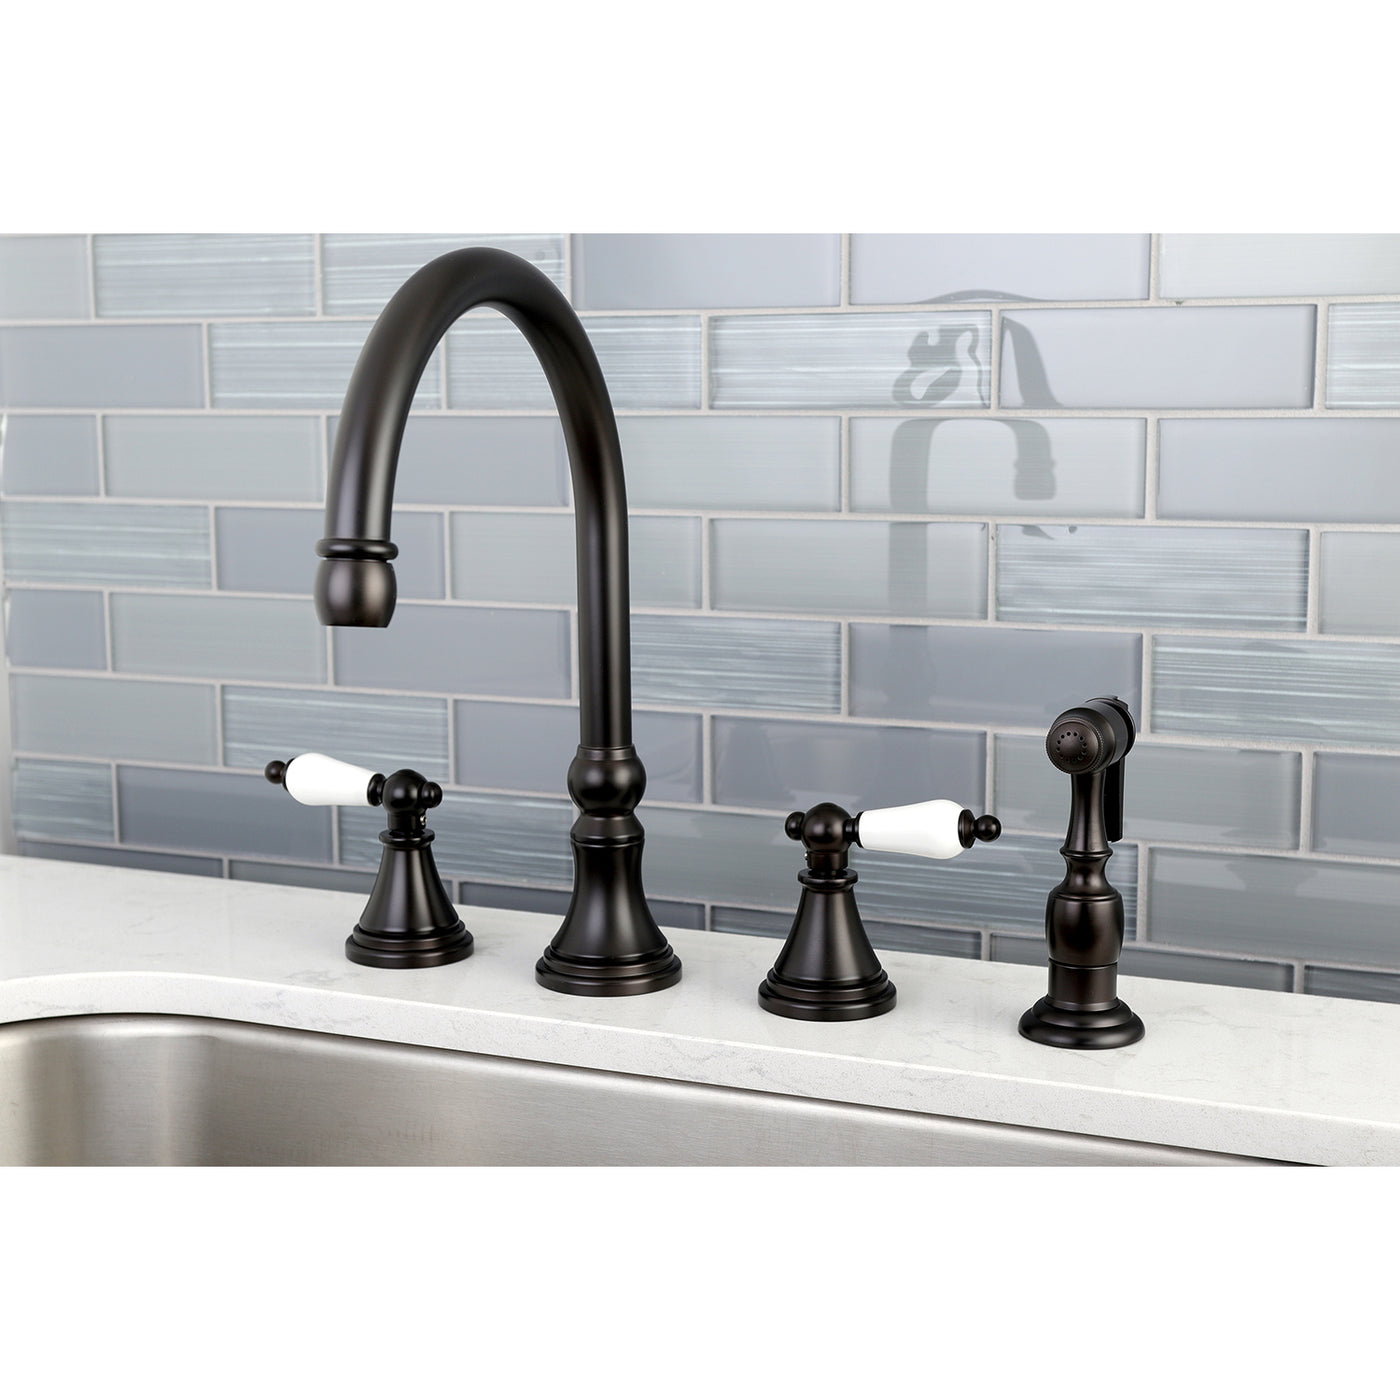 Elements of Design ES2795PLBS Widespread Kitchen Faucet with Brass Sprayer, Oil Rubbed Bronze